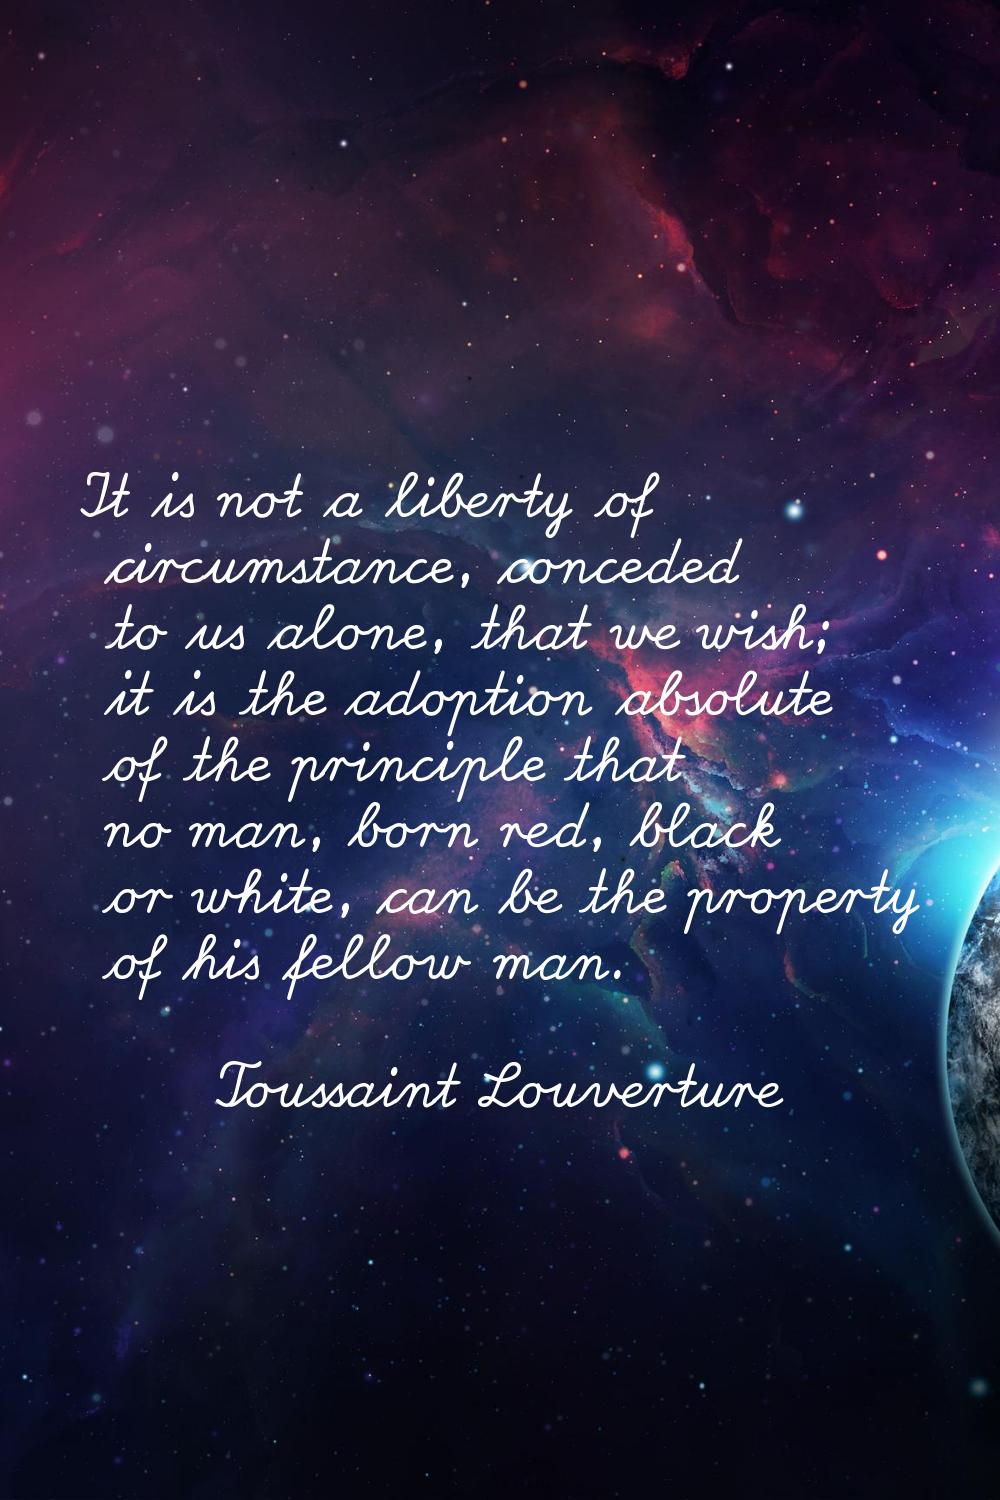 It is not a liberty of circumstance, conceded to us alone, that we wish; it is the adoption absolut